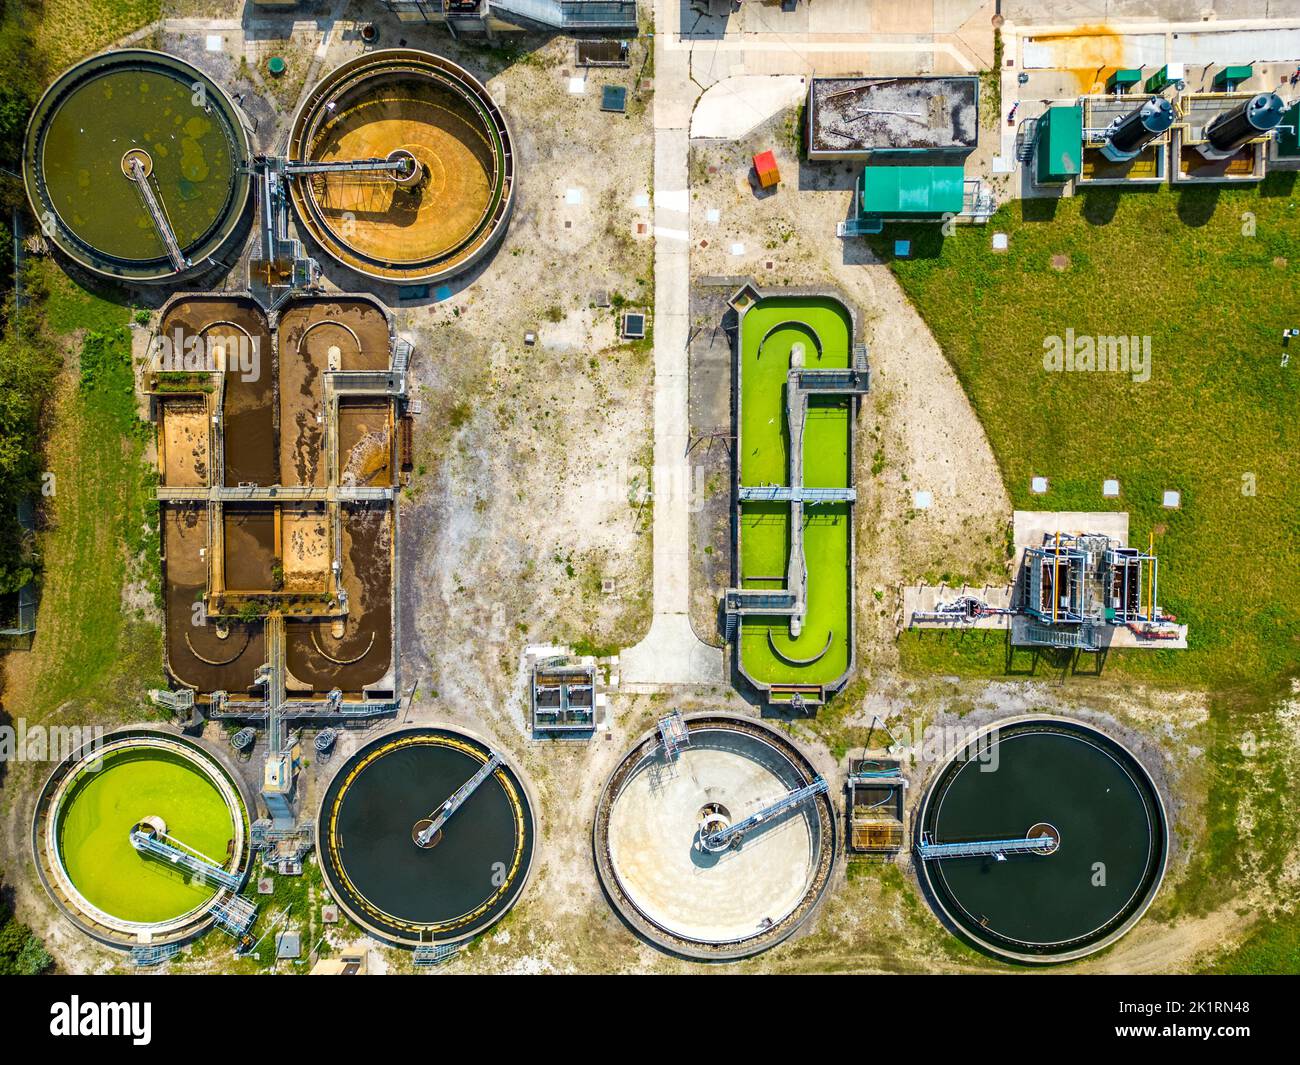 Sewage Water Treatment Plant in Leeds, Yorkshire. Facility for treating sewage water to protect the environment. Yorkshire Water facility. Stock Photo